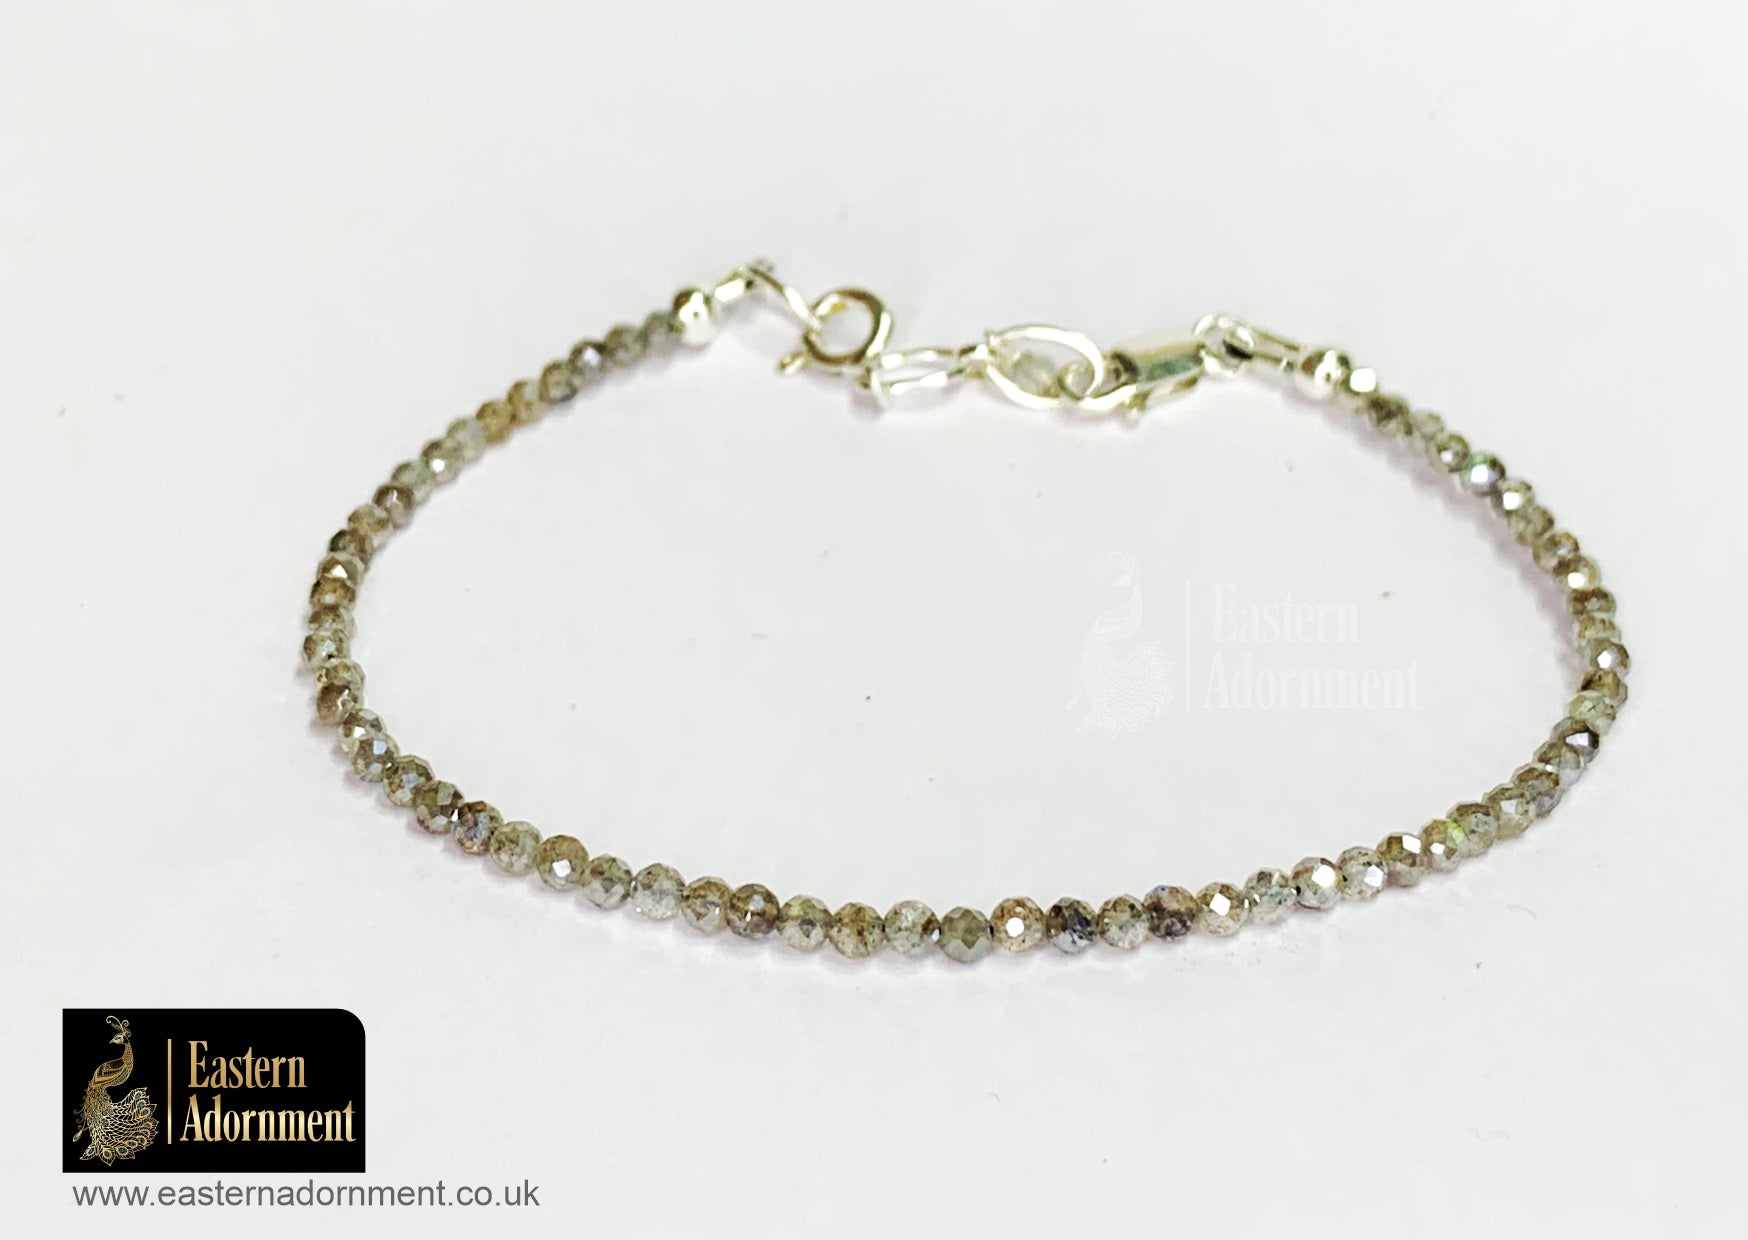 Taupe Zircon Micro Cut Bead Bracelet with Silver Charm Clasp